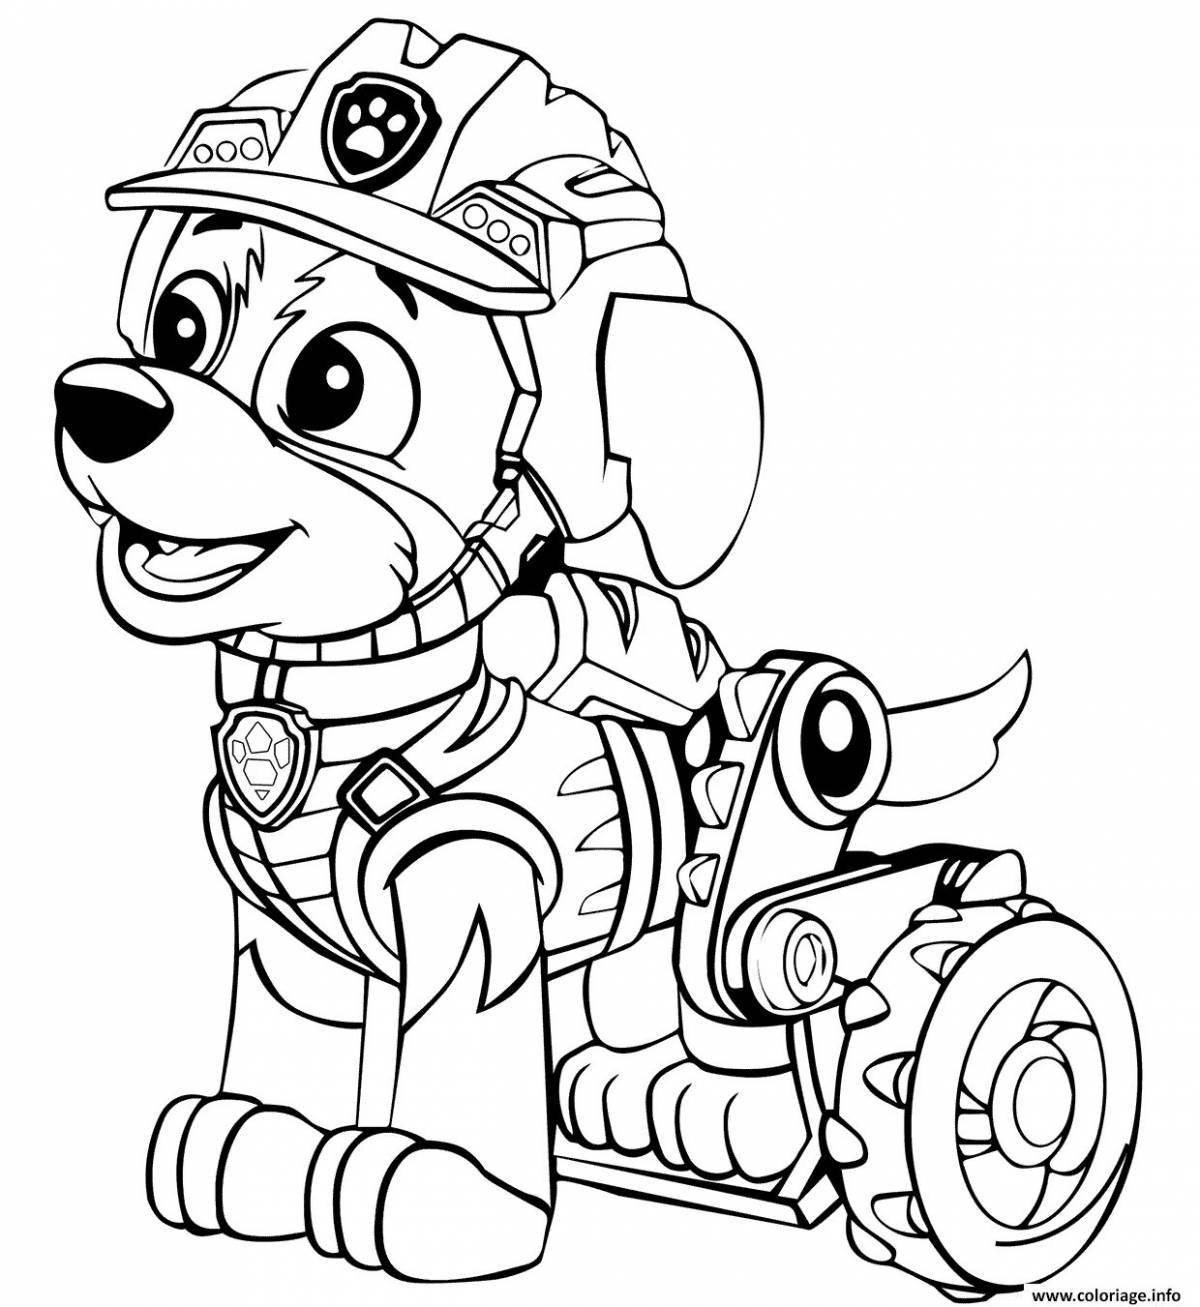 Cute paw patrol tower coloring page